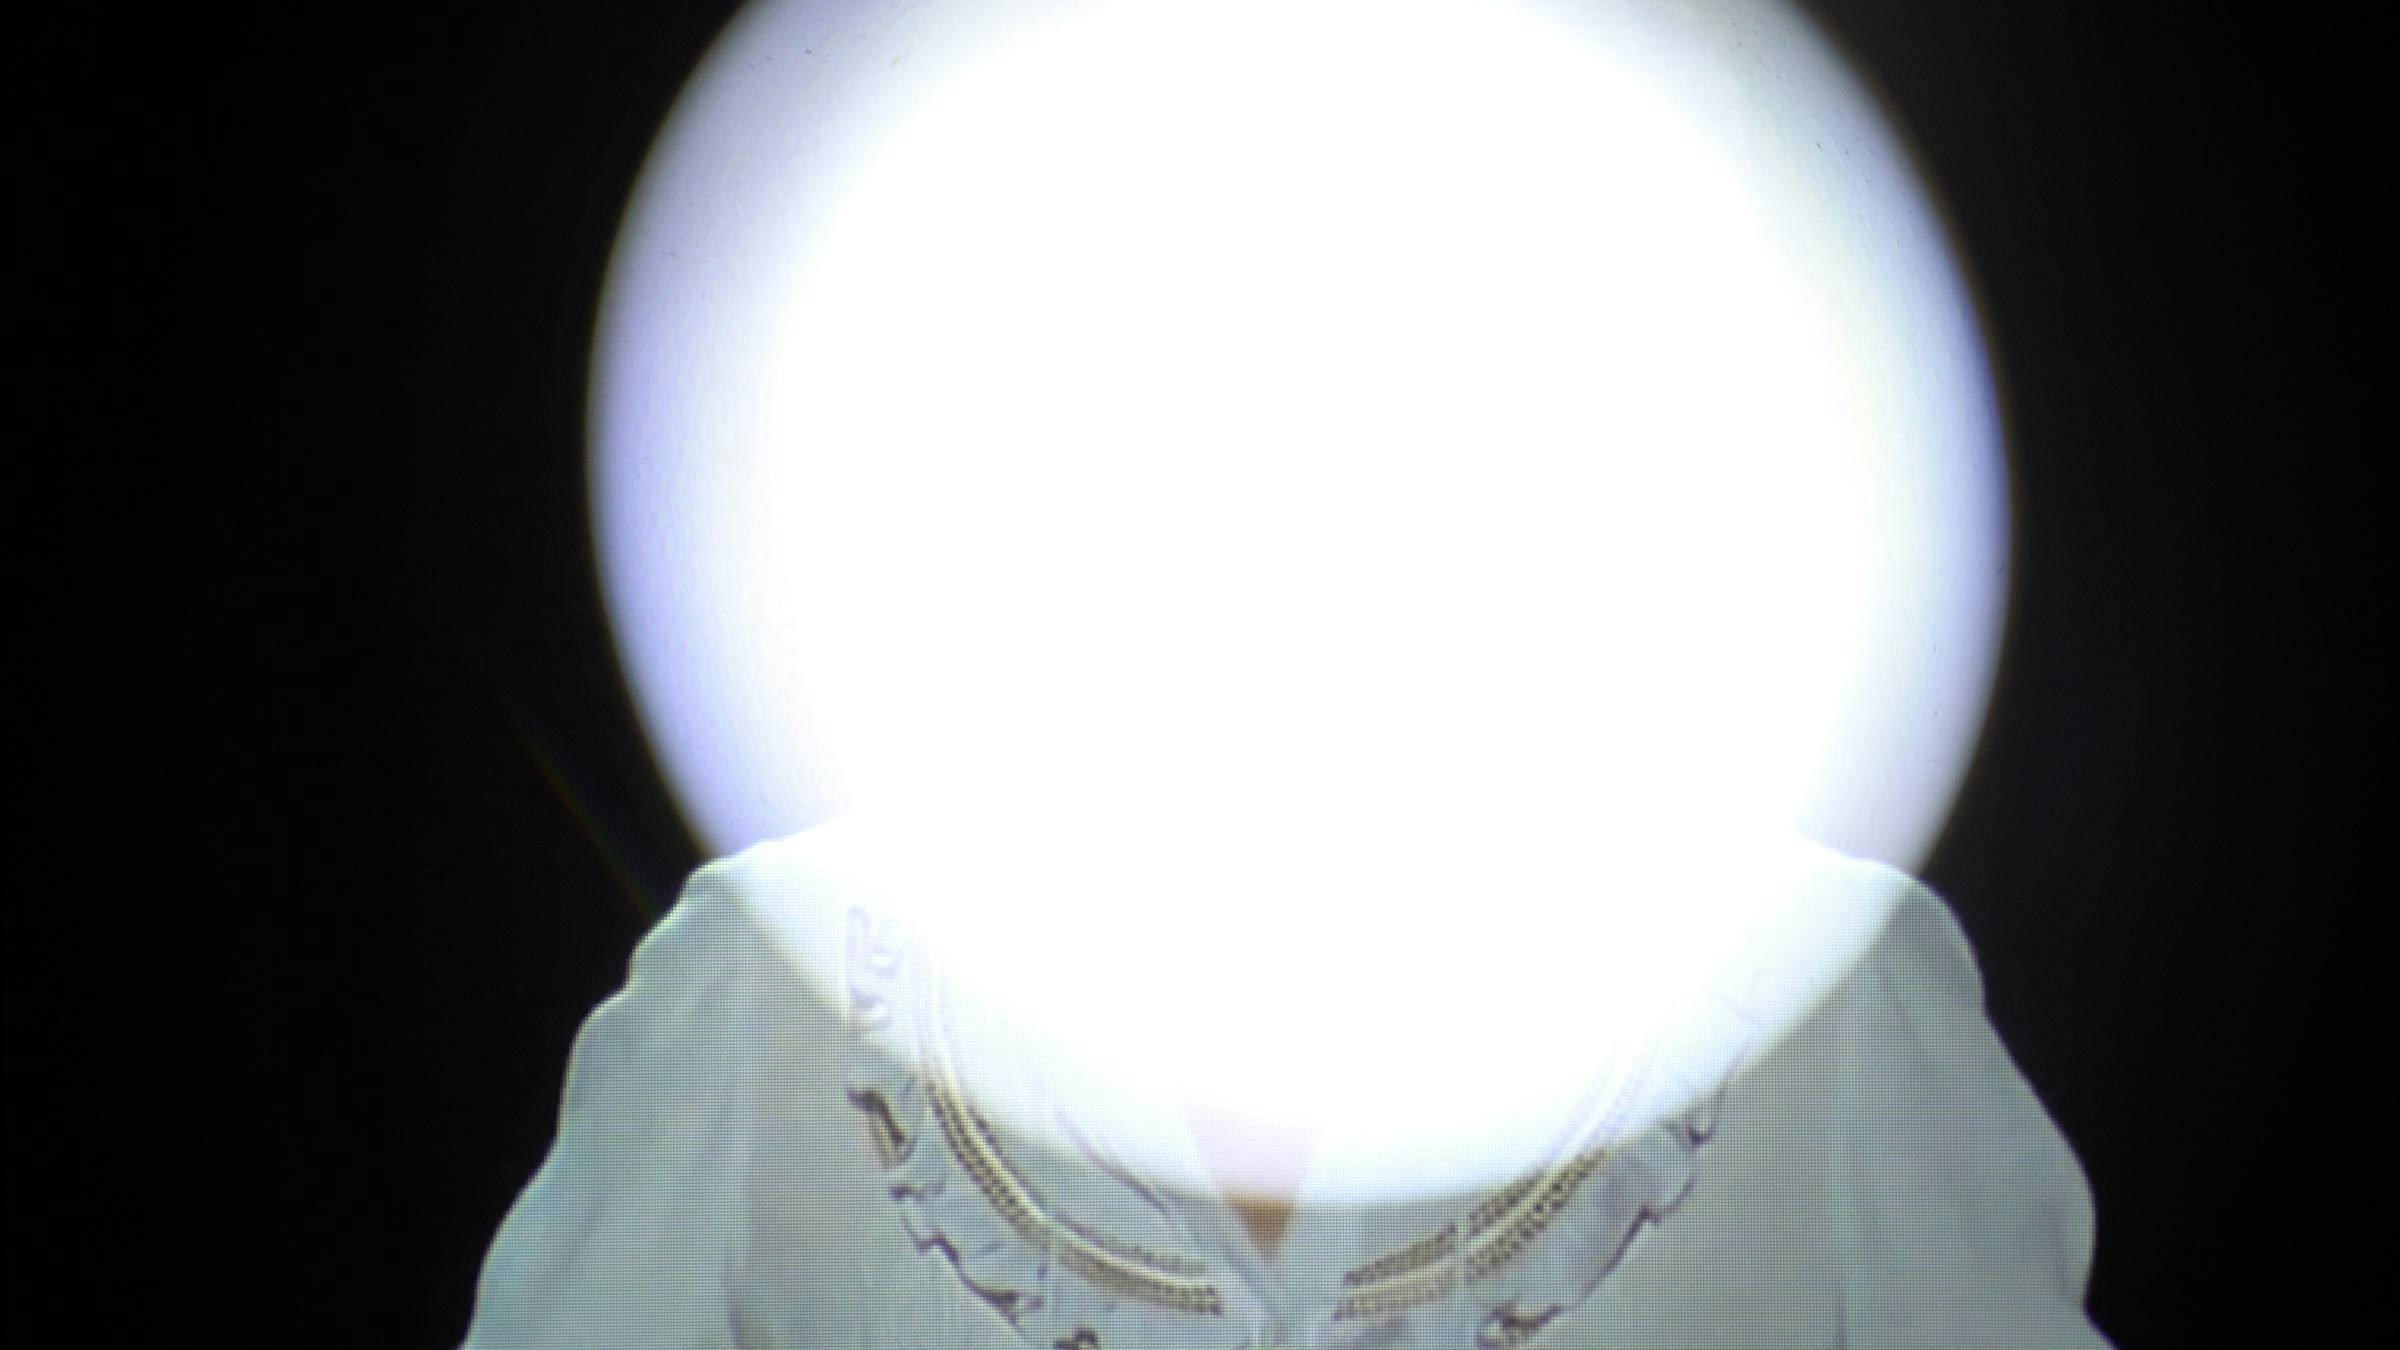 an image of a person wearing a blue blouse. Their face is obscured by a white circle of light. The background is black